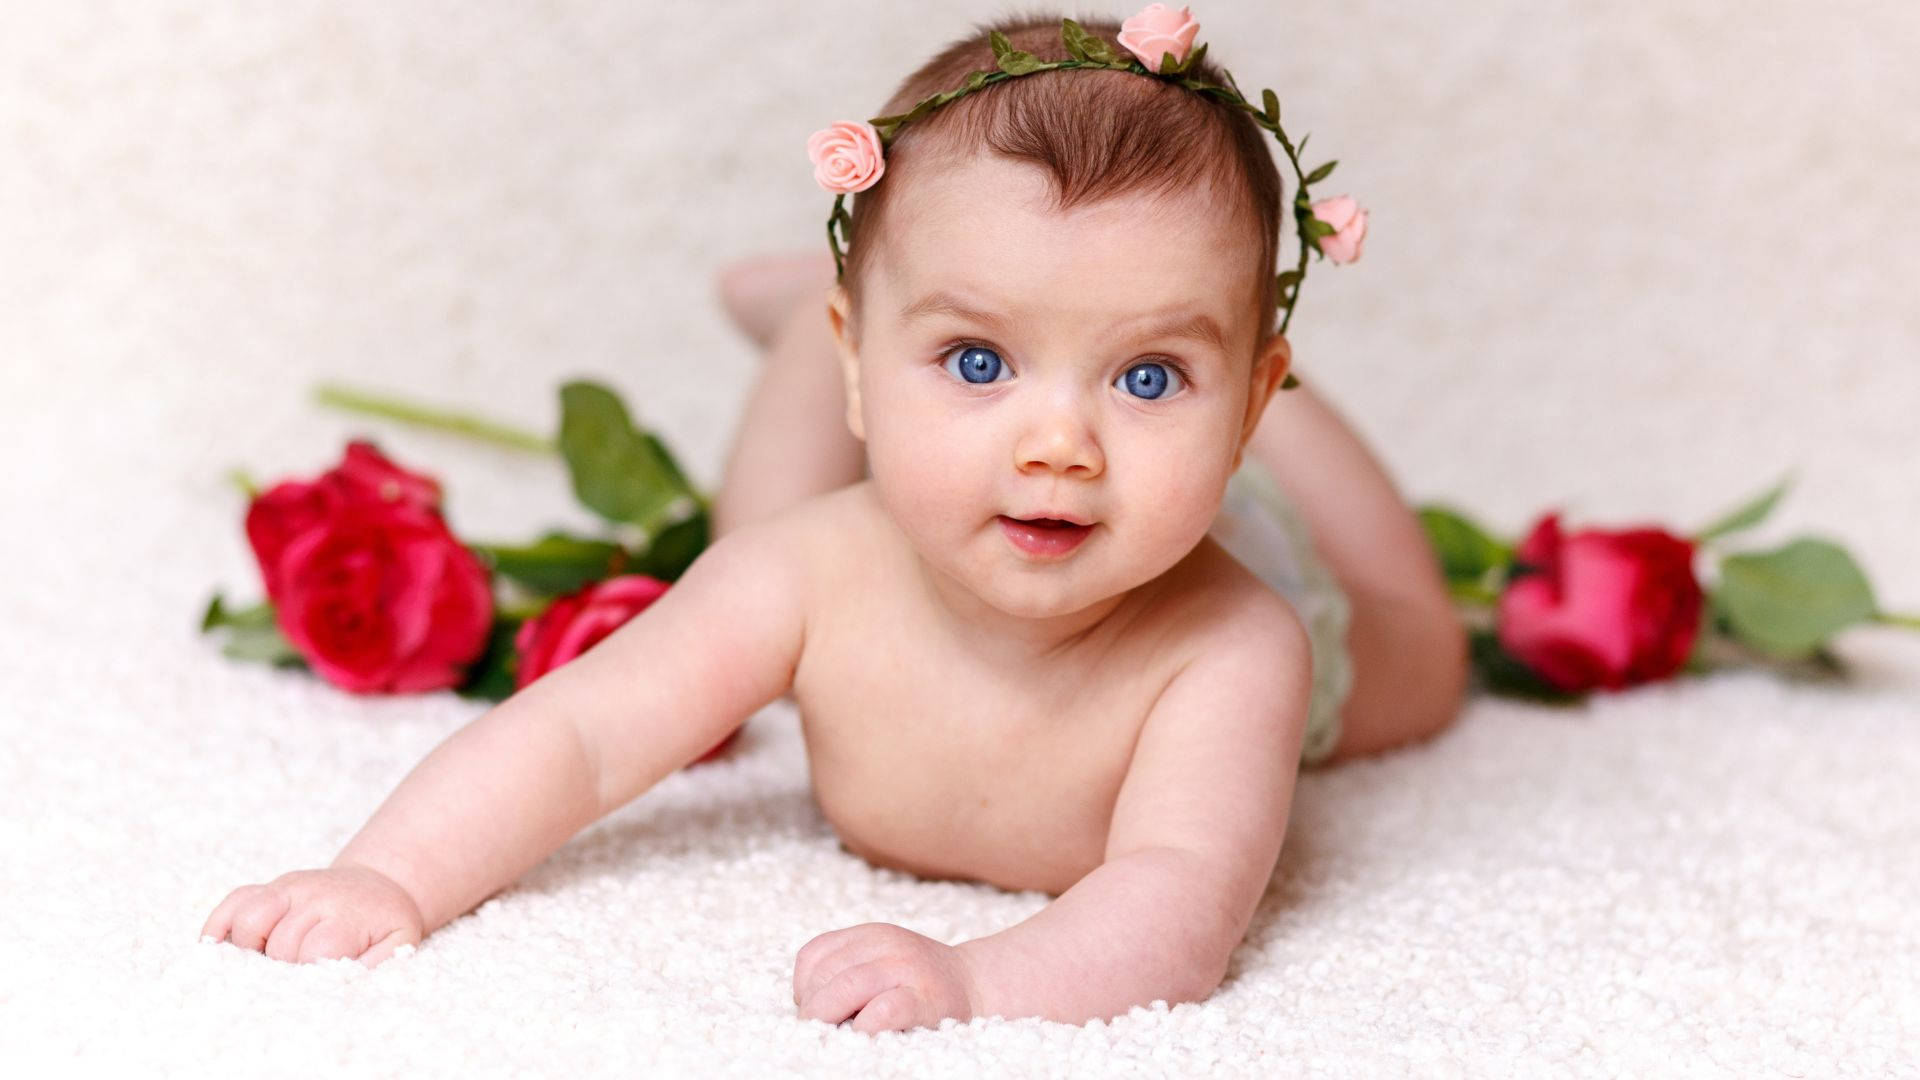 Baby Photography Posing With Roses Wallpaper